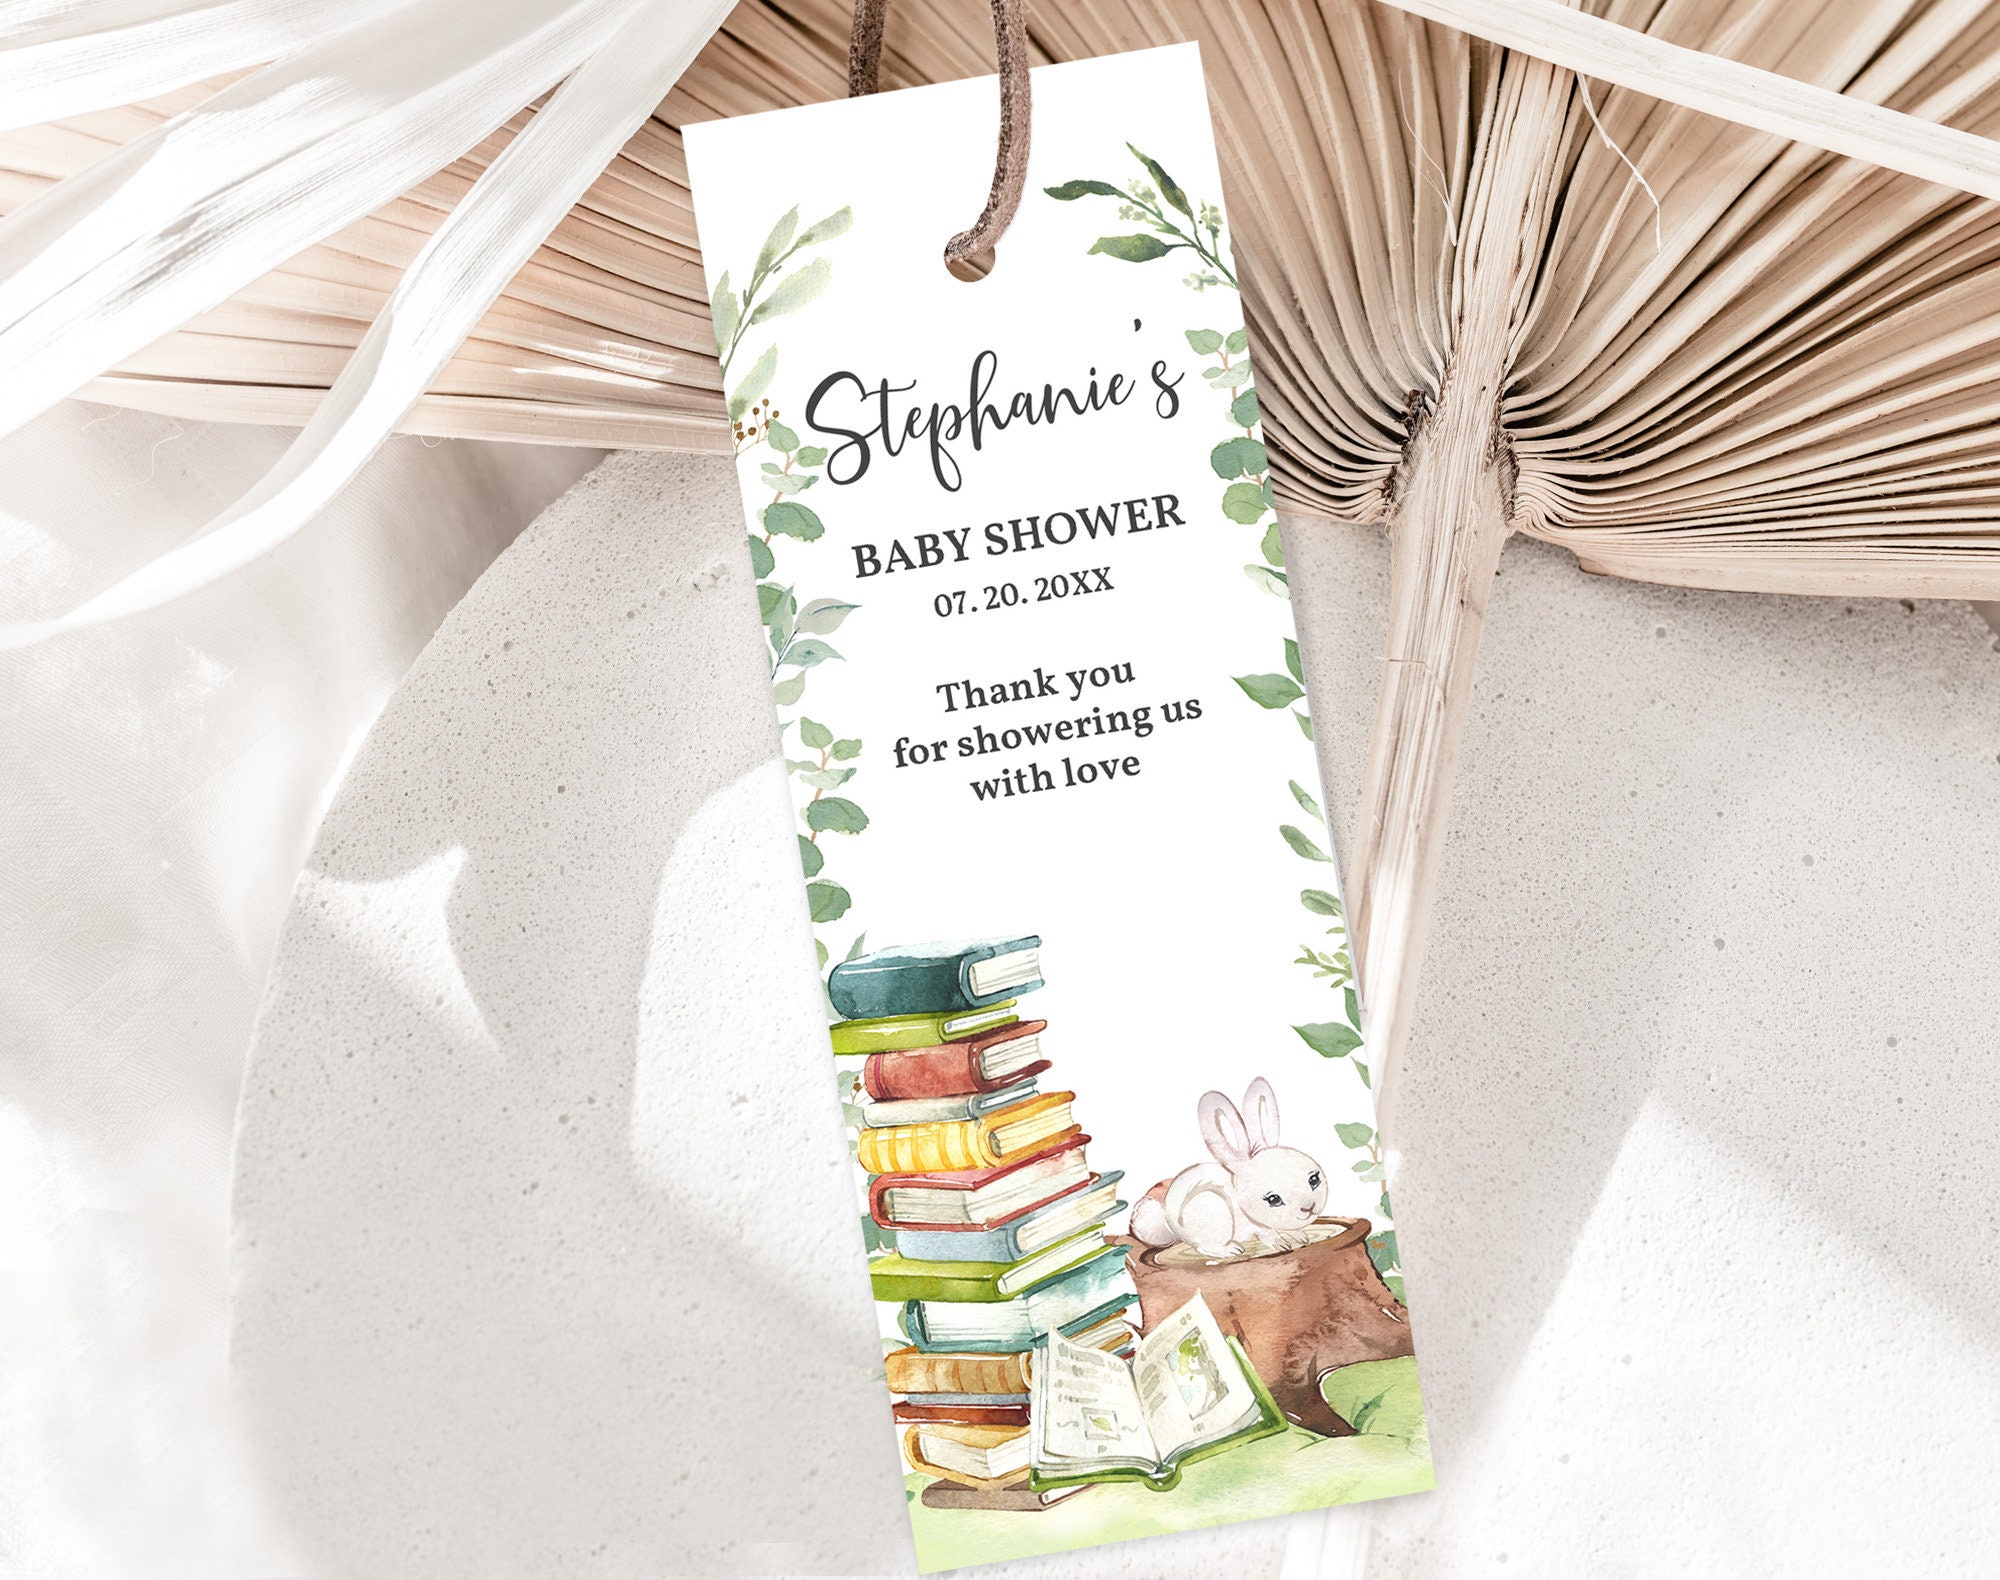 Double-sided Laminated Bookmarks With Tassels Vivid Watercolor Blooms  Floral Bookmarks Tassel Bookmarks Bookmarks for Women 